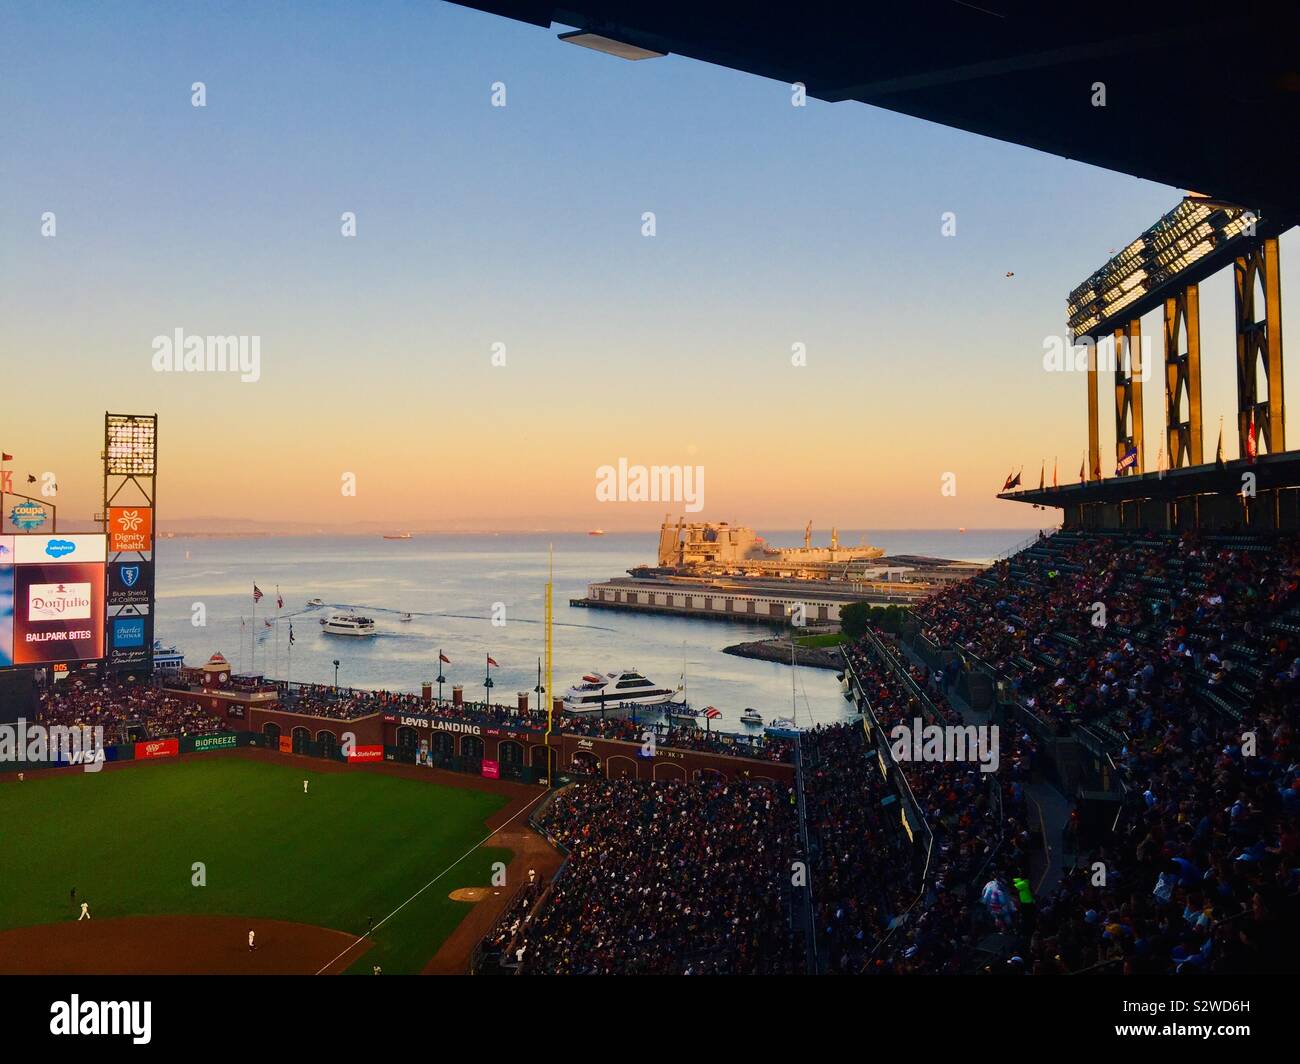 A view of the sunset in the San Francisco Bay from Oracle Park, Home to the Giants of Major League Baseball. Stock Photo